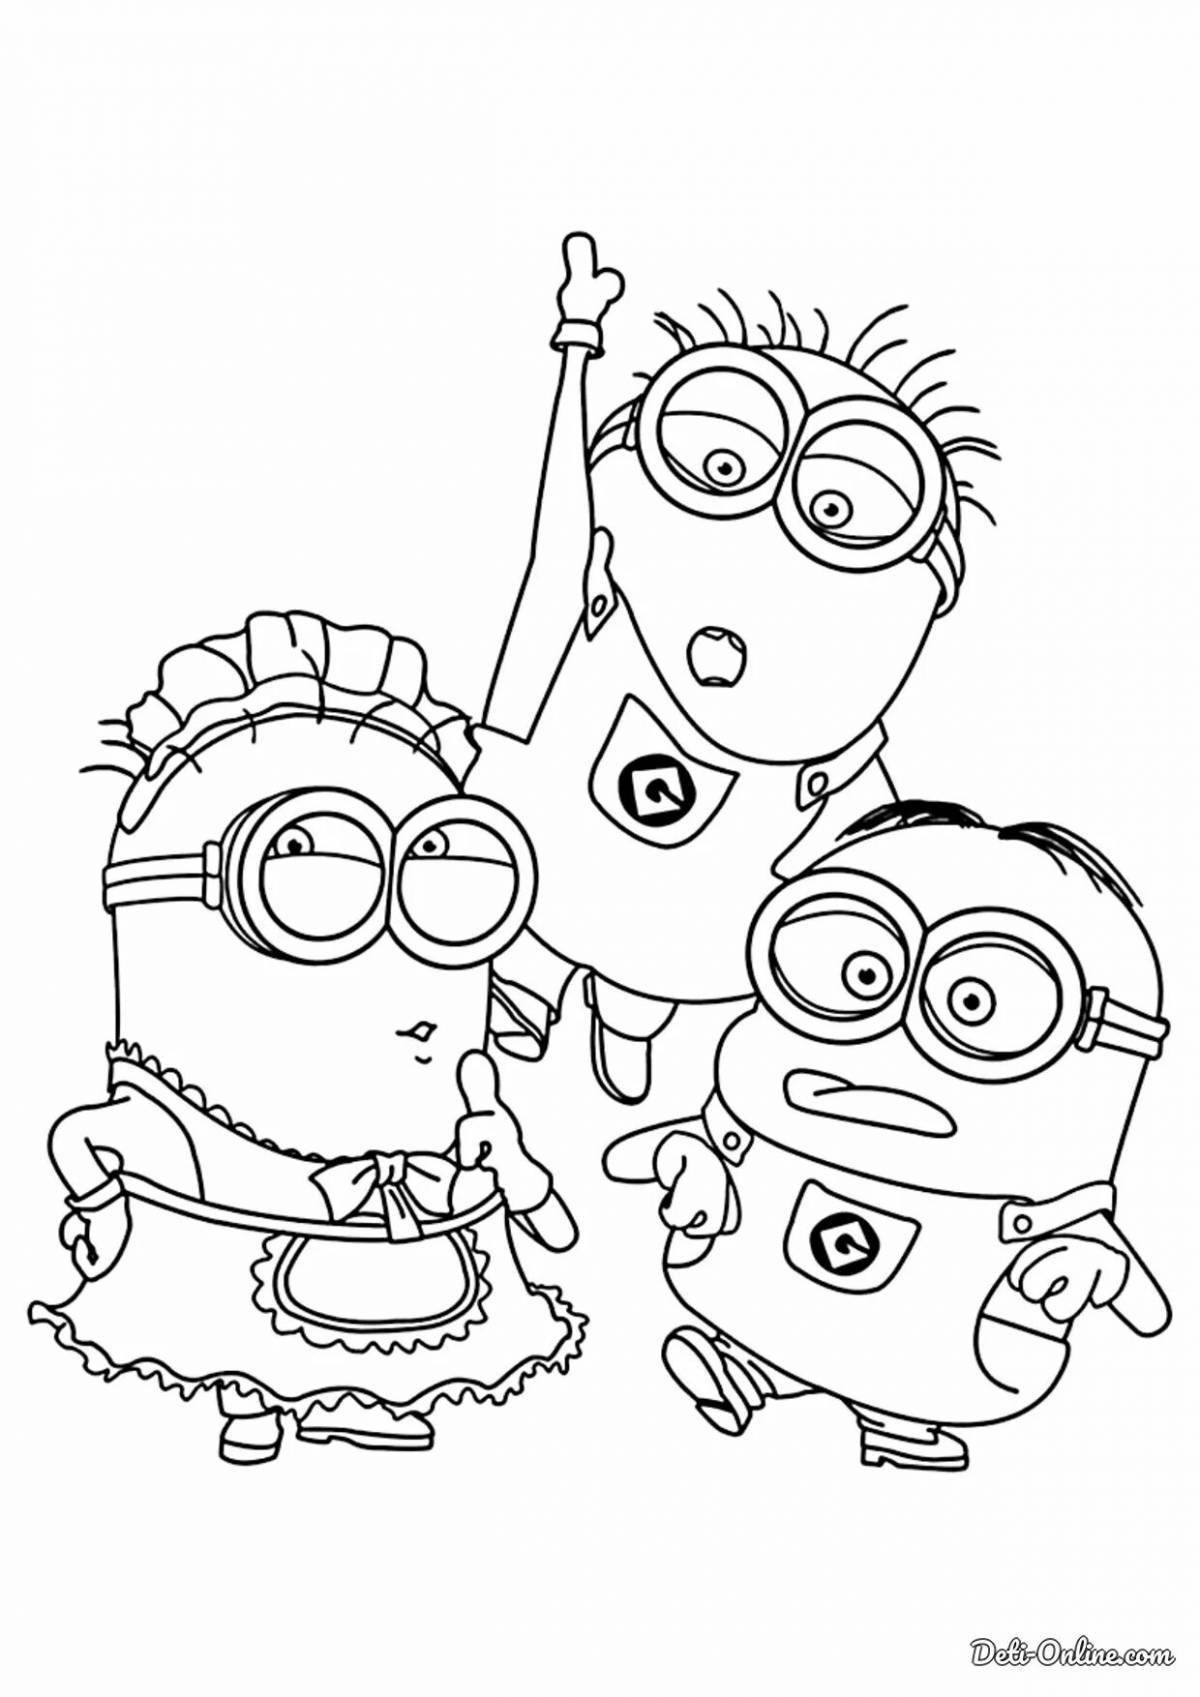 Colorful coloring pages with minions